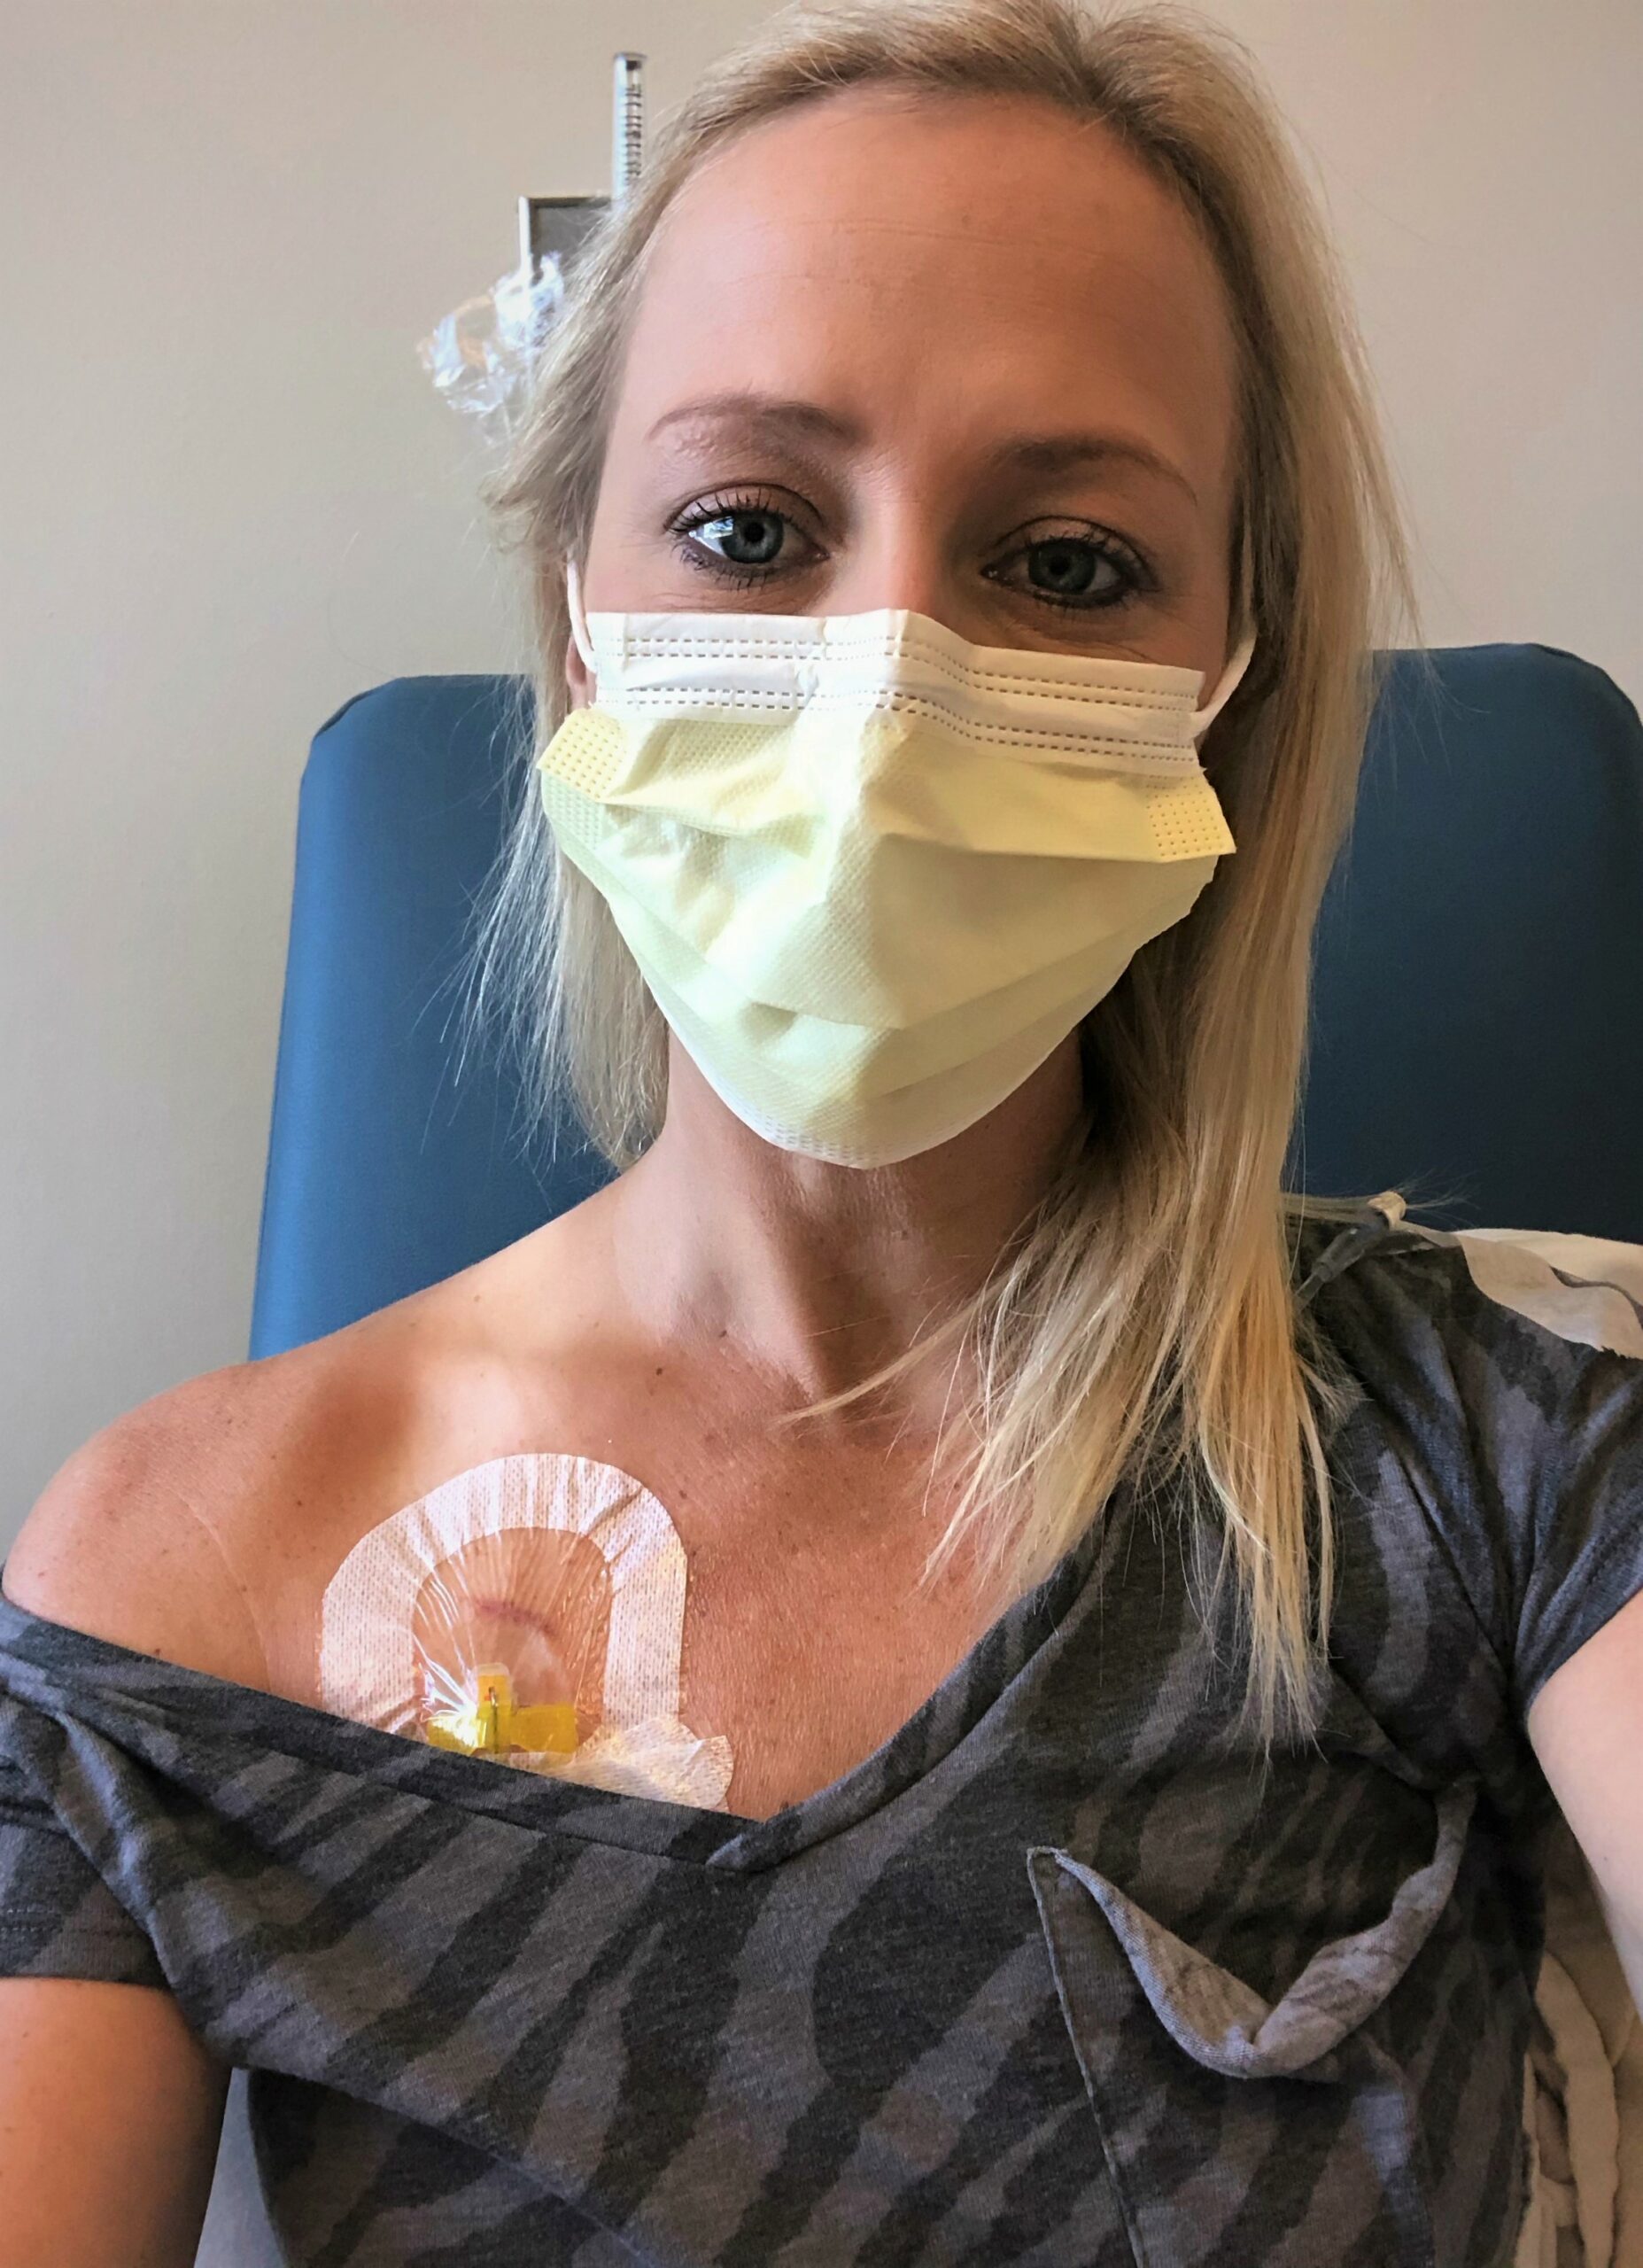 Erin captures a selfie during her chemotherapy treatment